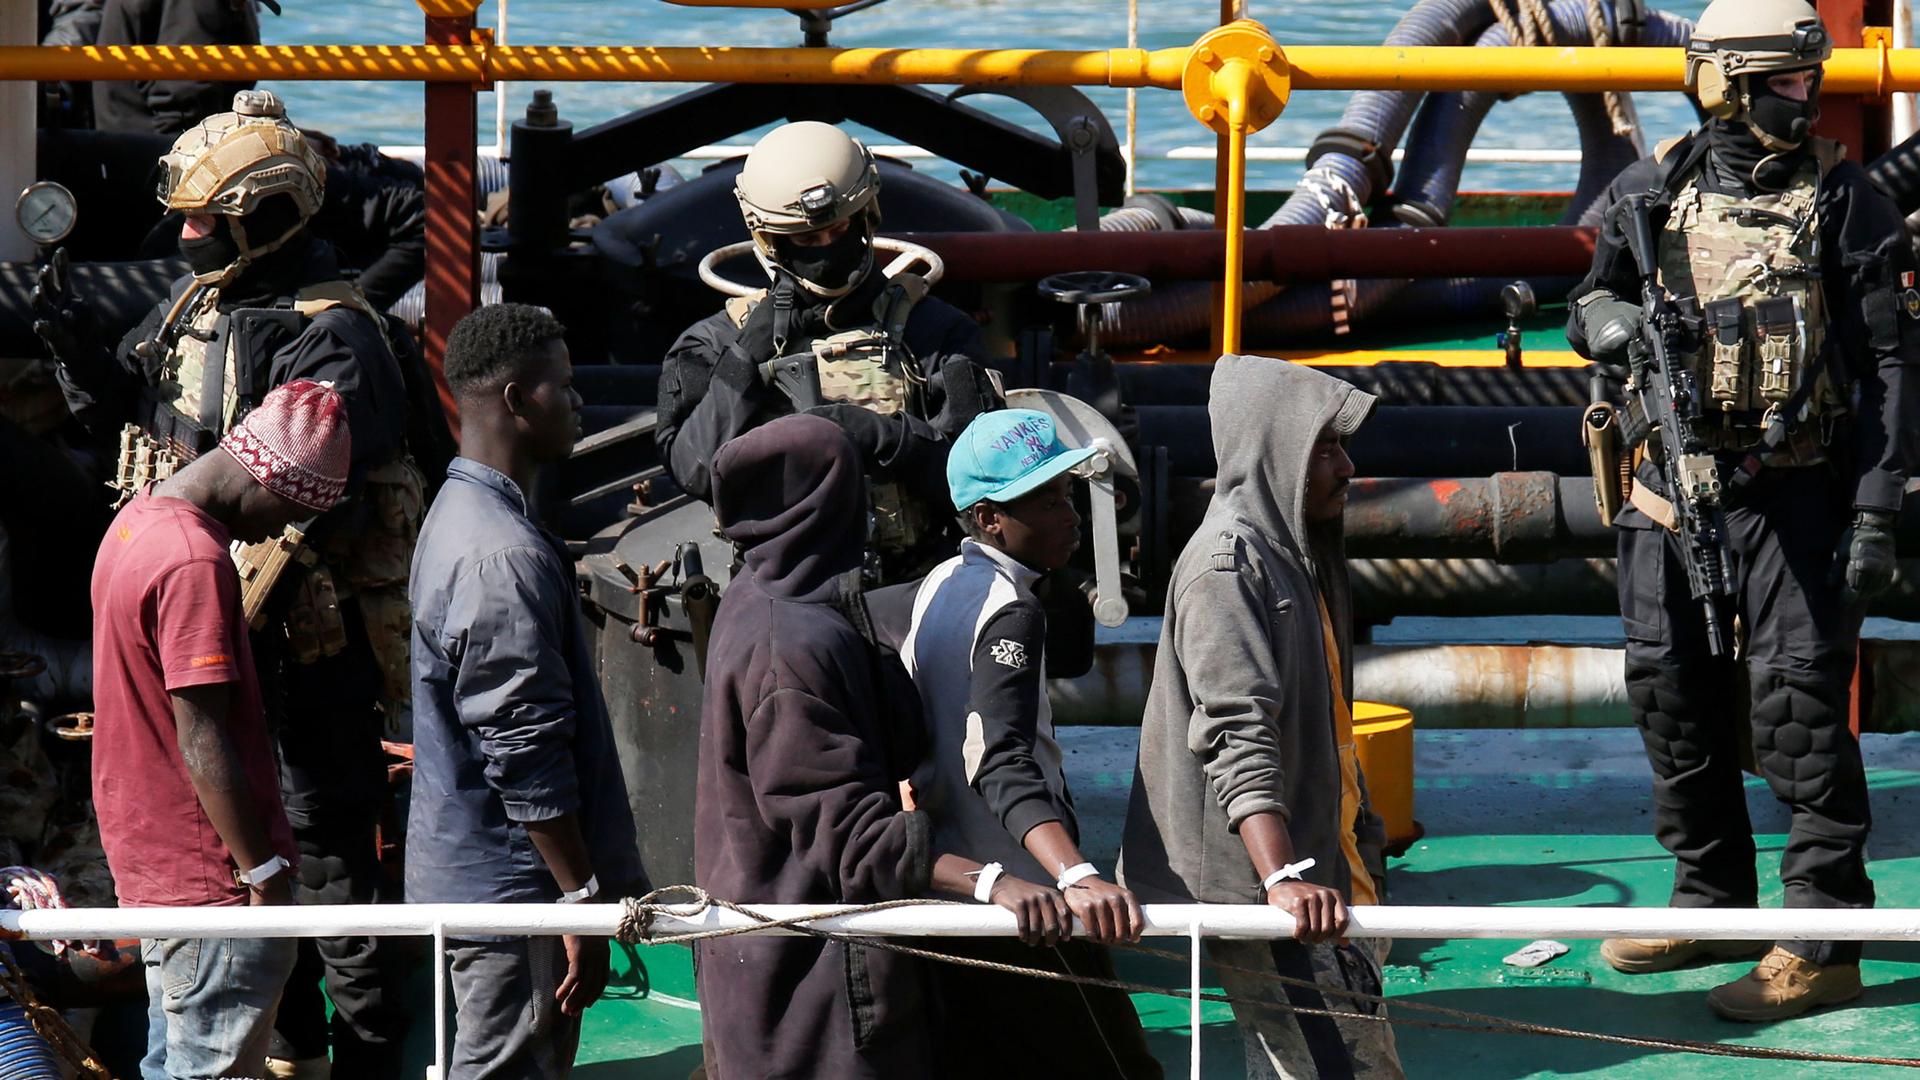 Migrants are shown in the near ground walking in a line as they disembark from a merchant ship with armed soldiers behind them.